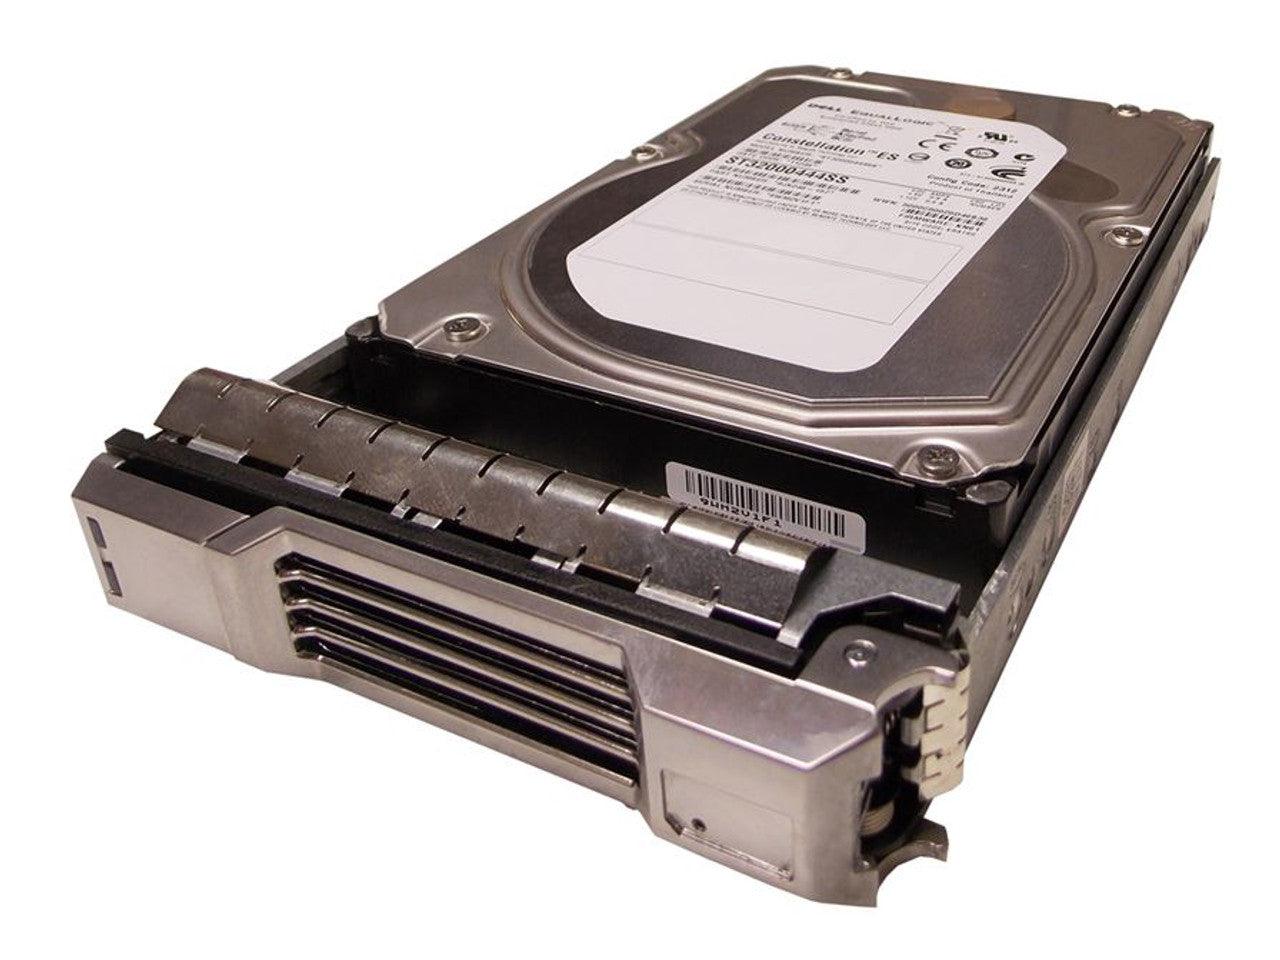 Dell equallogic FY4Y0 2TB 7.2k rpm SAS 6Gbps 3.5inch Hard Drive